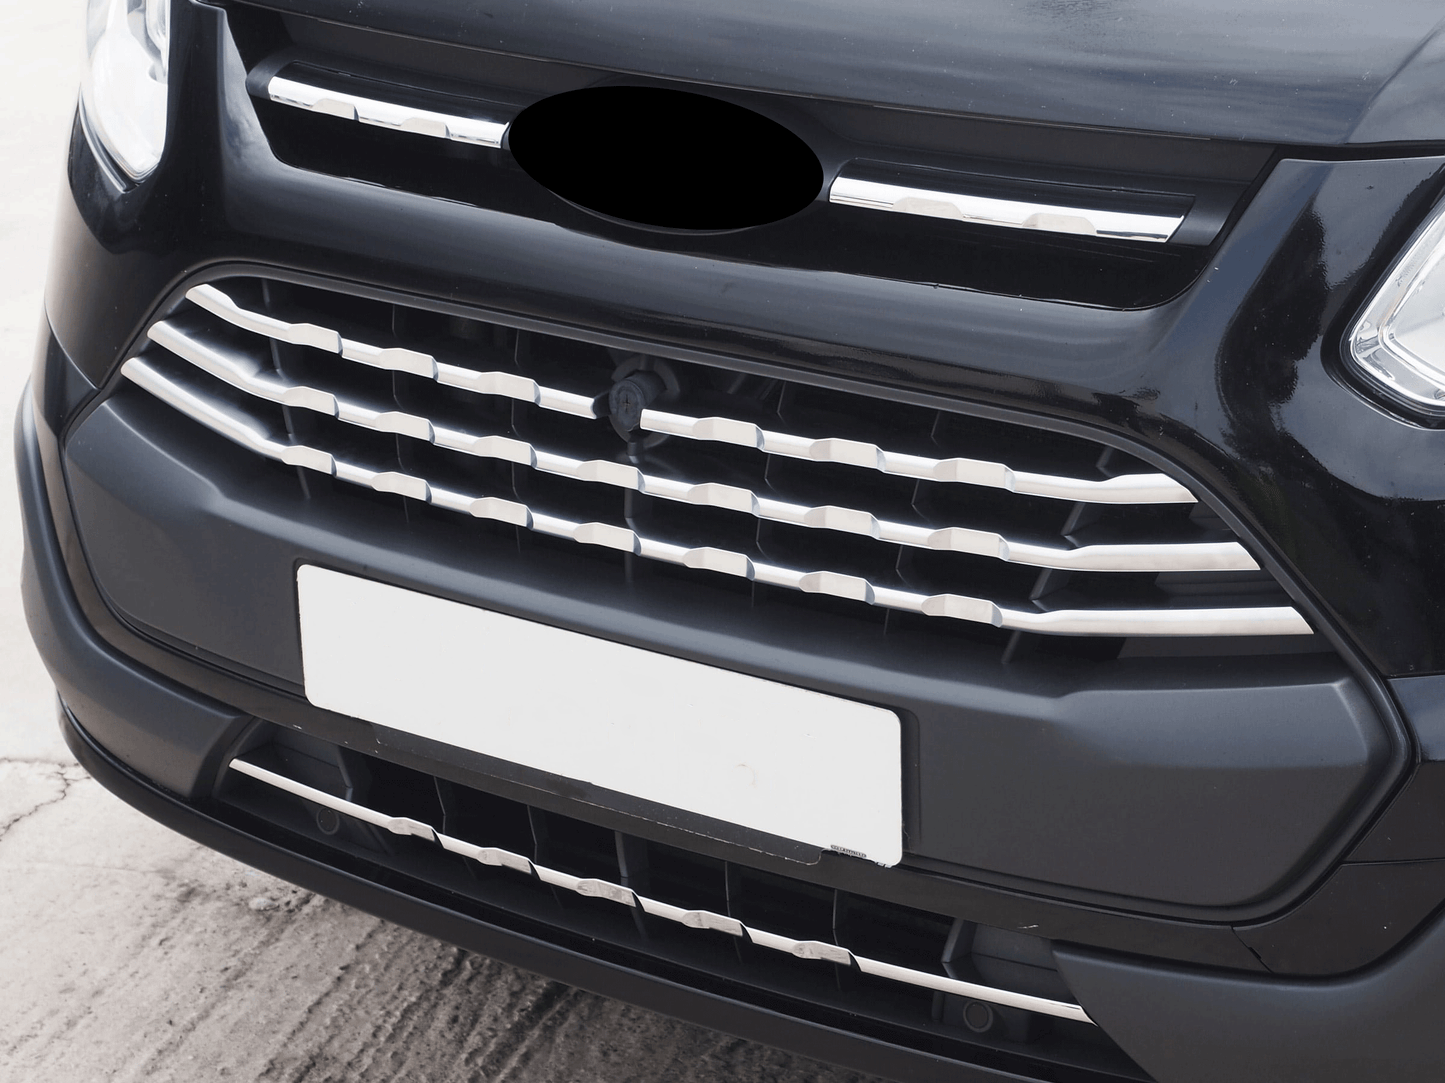 For Ford Transit Custom Front Grille Trims Shiny Chrome Front Styling (7Pcs) 2012 - 2018 MK1 Painted and Ready to Fit